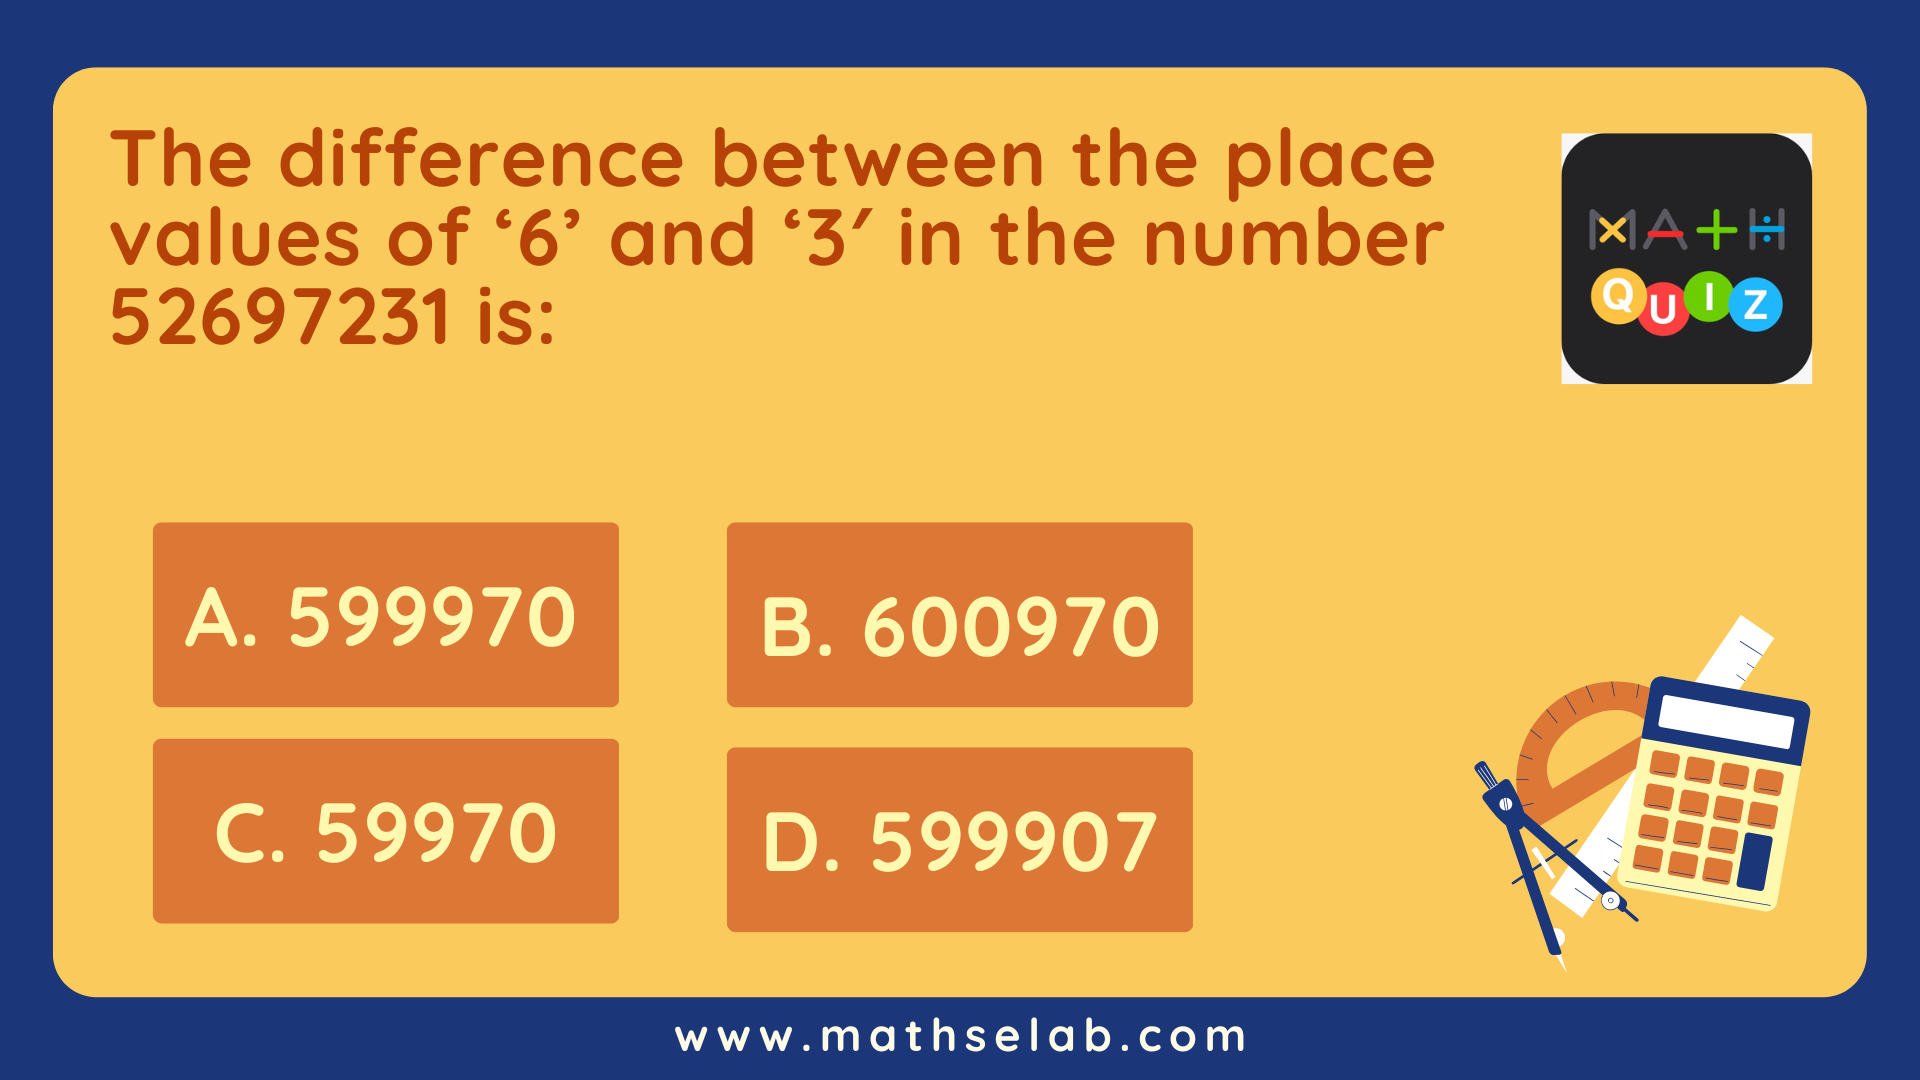 The difference between the place values of '6' and ‘3' in the number 52697231 is: